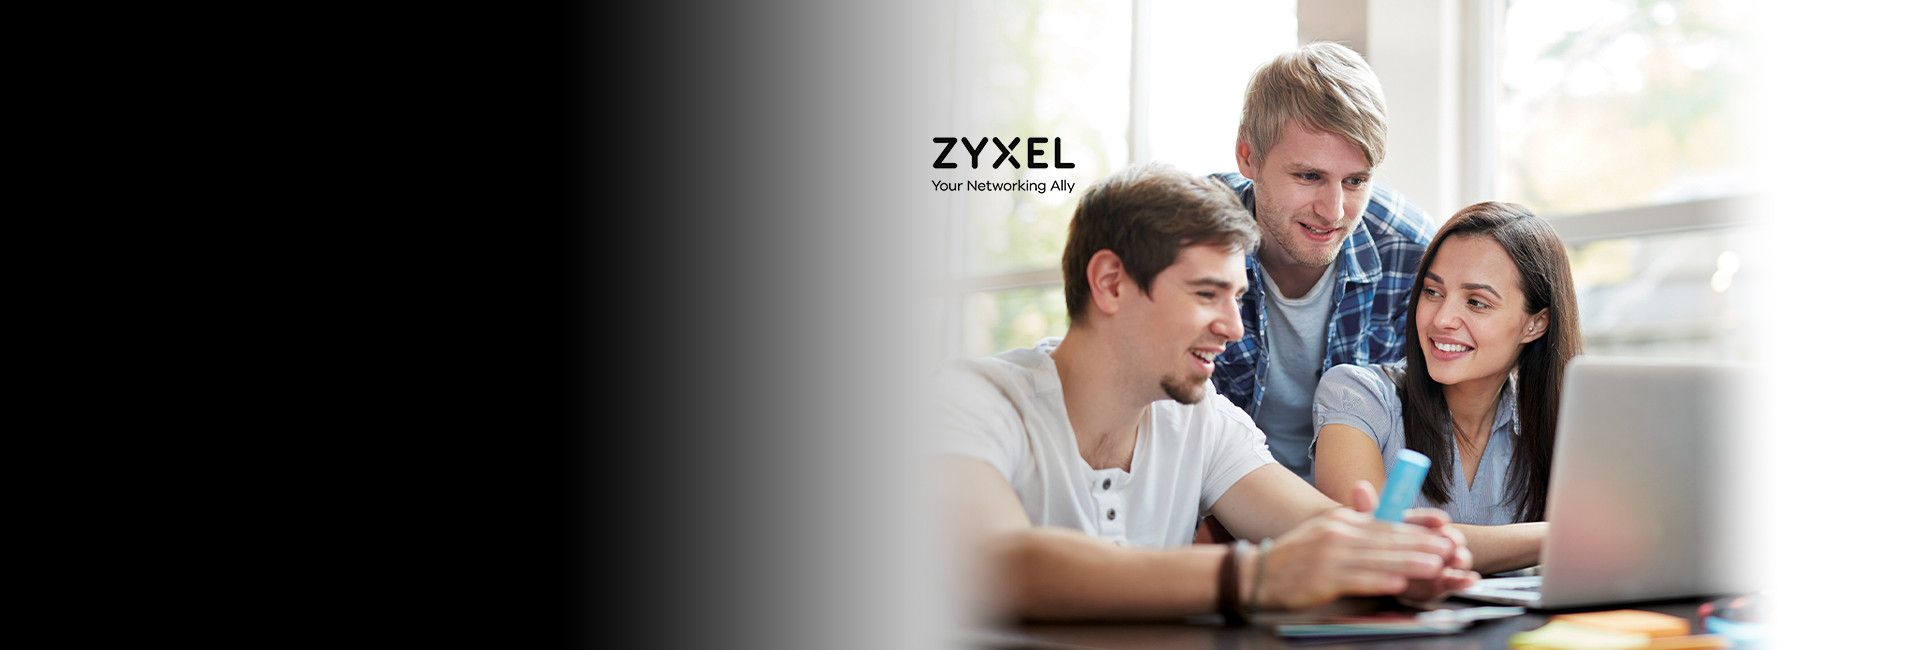 Zyxel for Education